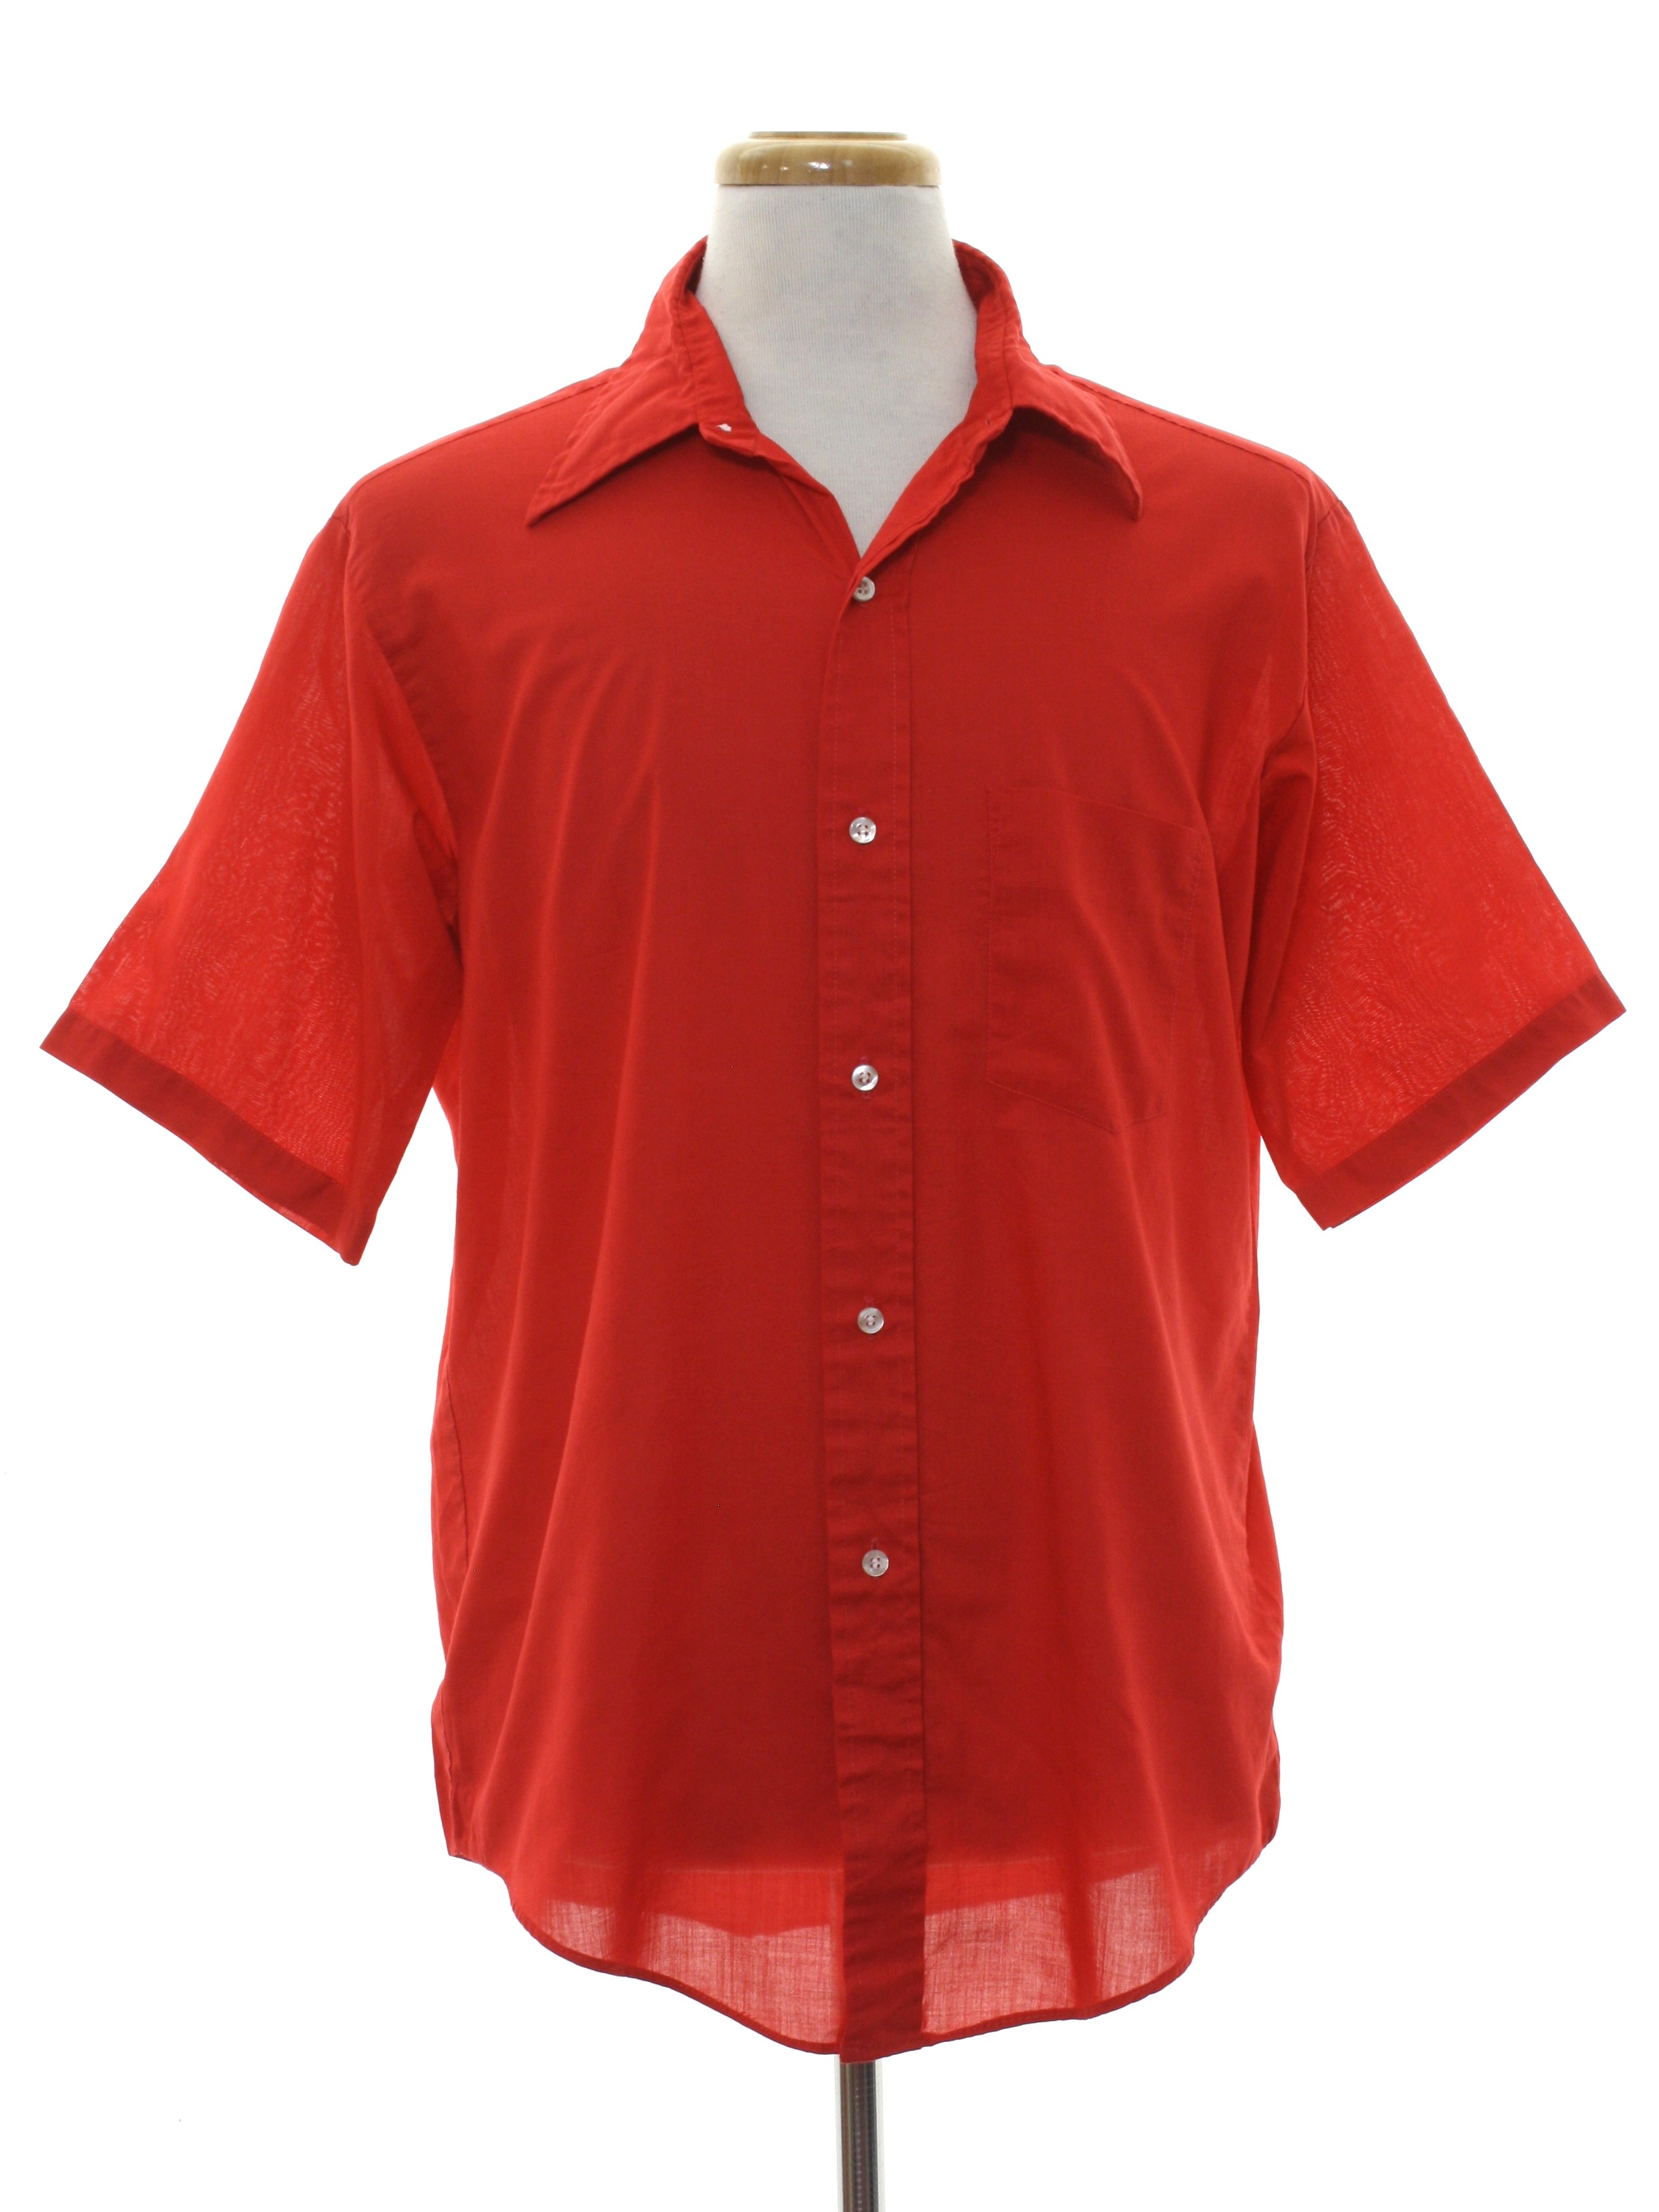 Seventies Vintage Shirt: 70s -Donegal- Mens red polyester cotton blend ...